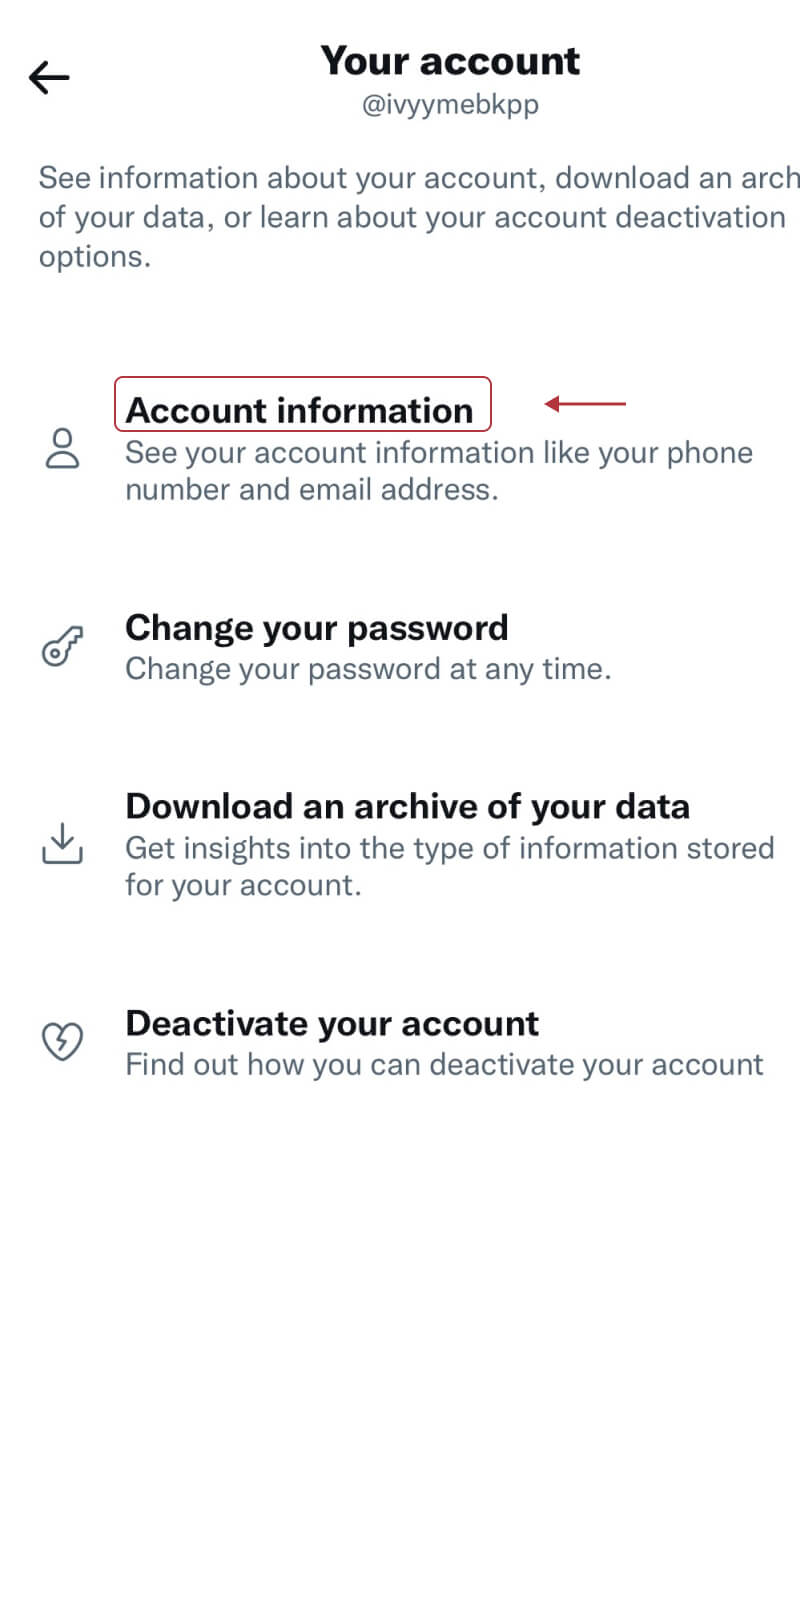 Tap the “Account information” 